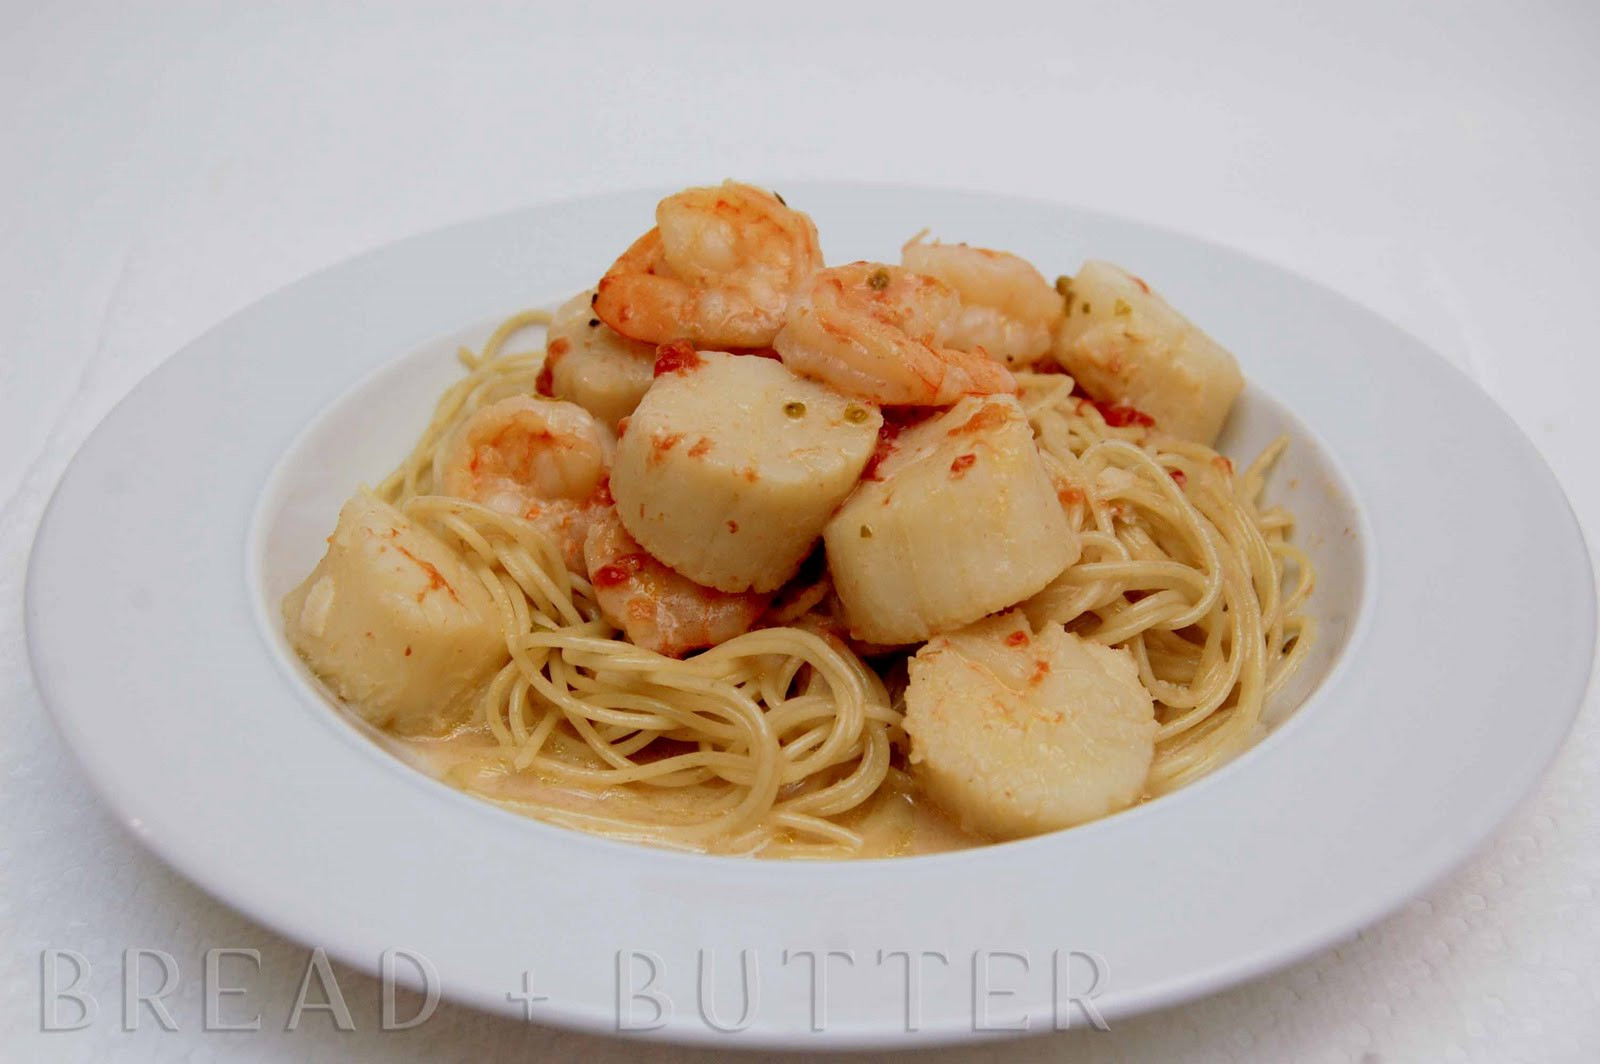 Shrimp And Scallop Pasta With White Wine Sauce
 Bread Butter Shrimps & Scallops with a White Wine Broth